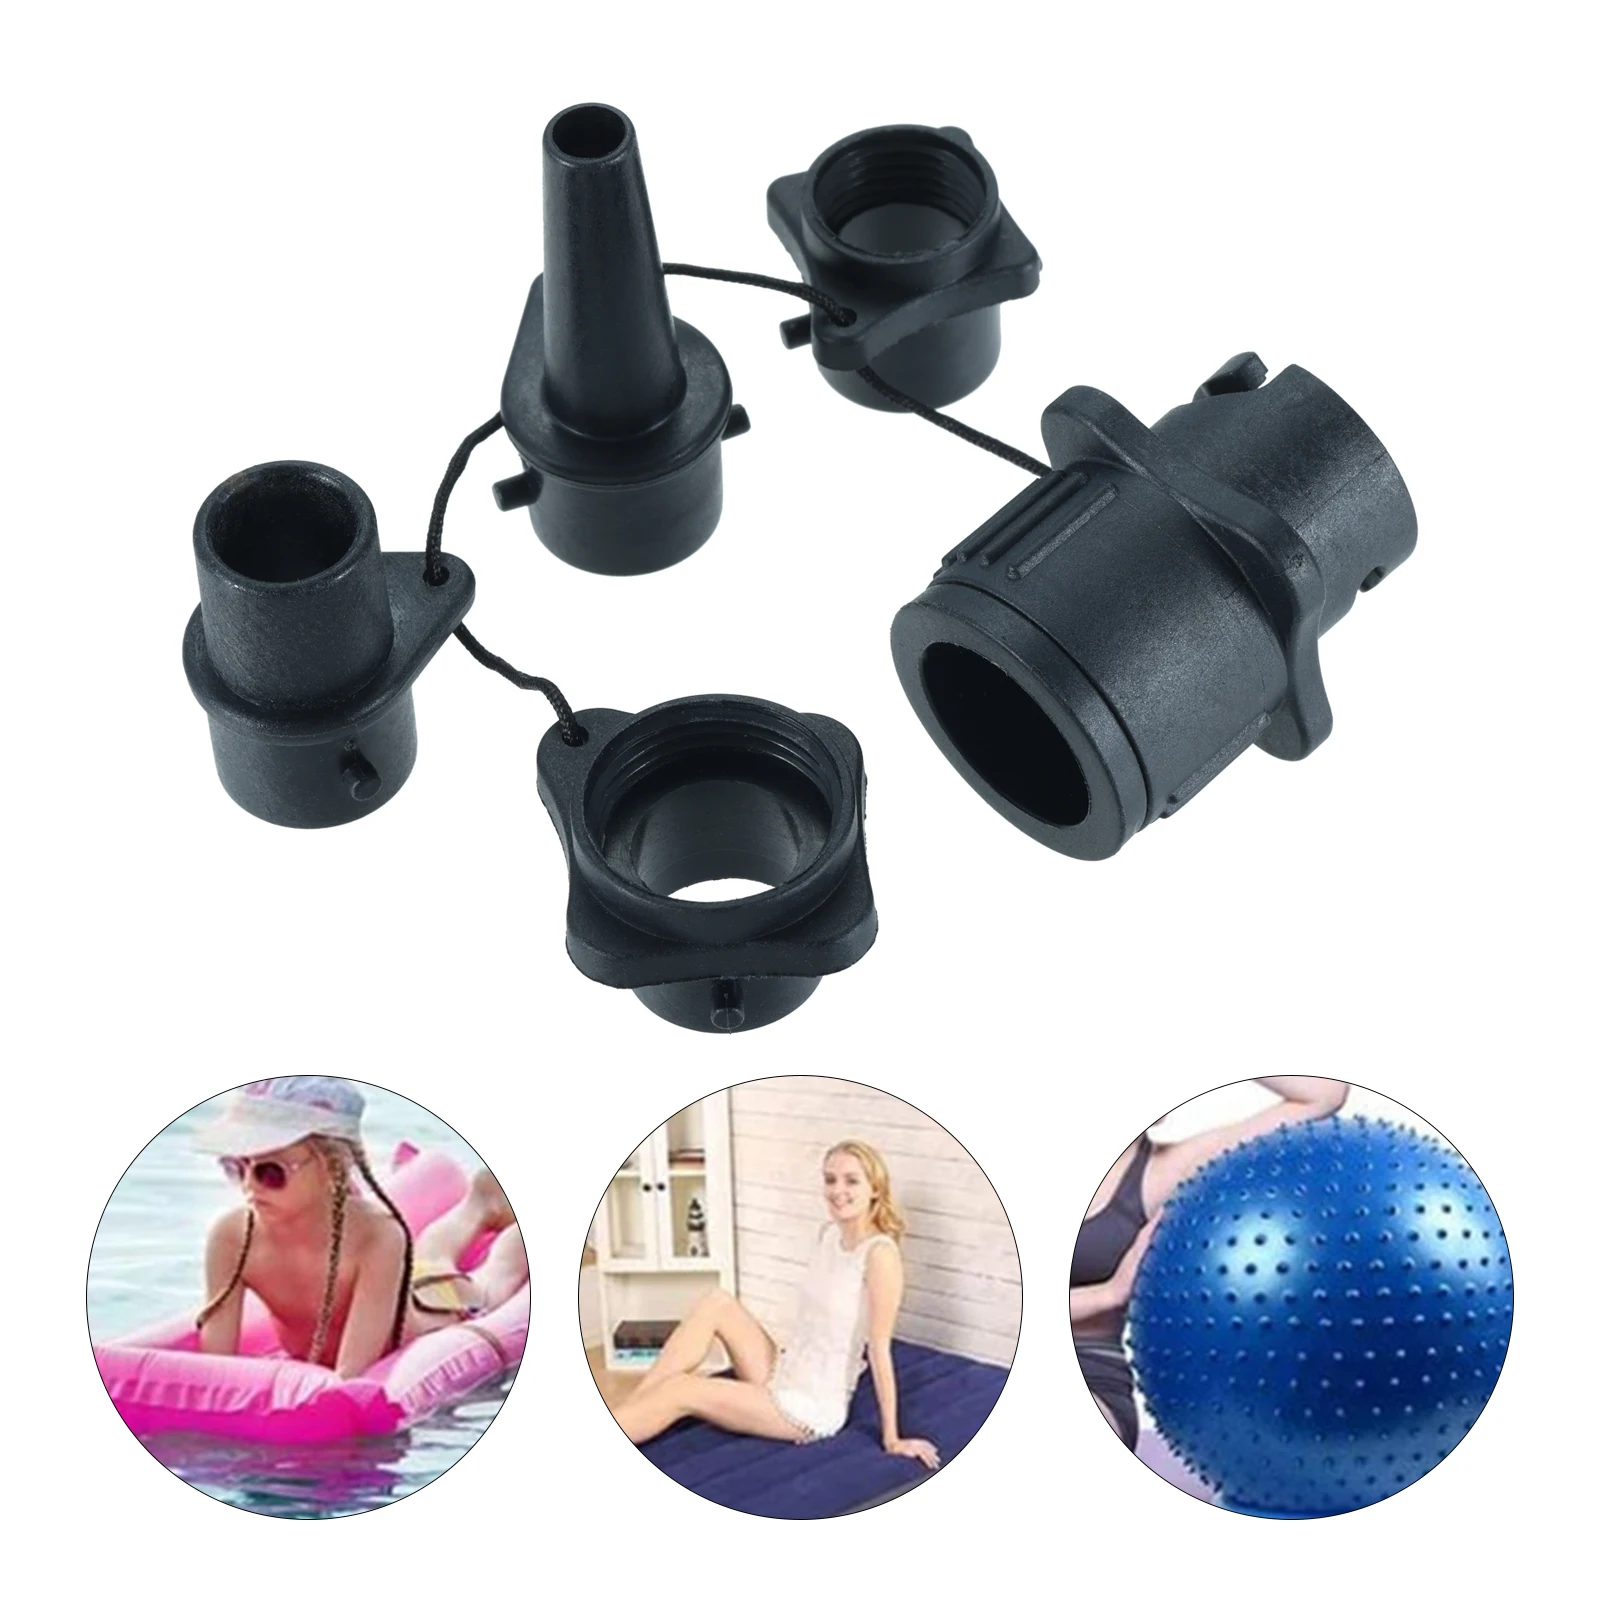 1 Set Air Valve Nozzle Adapter Kit Black Plastic Multi-Function Hose Connector Surf Paddle Board Canoe Inflatable Boat Accessory plastic 75mm adapter attachments connecting vacuum cleaner hose converter parts accessory 32 35mm useful